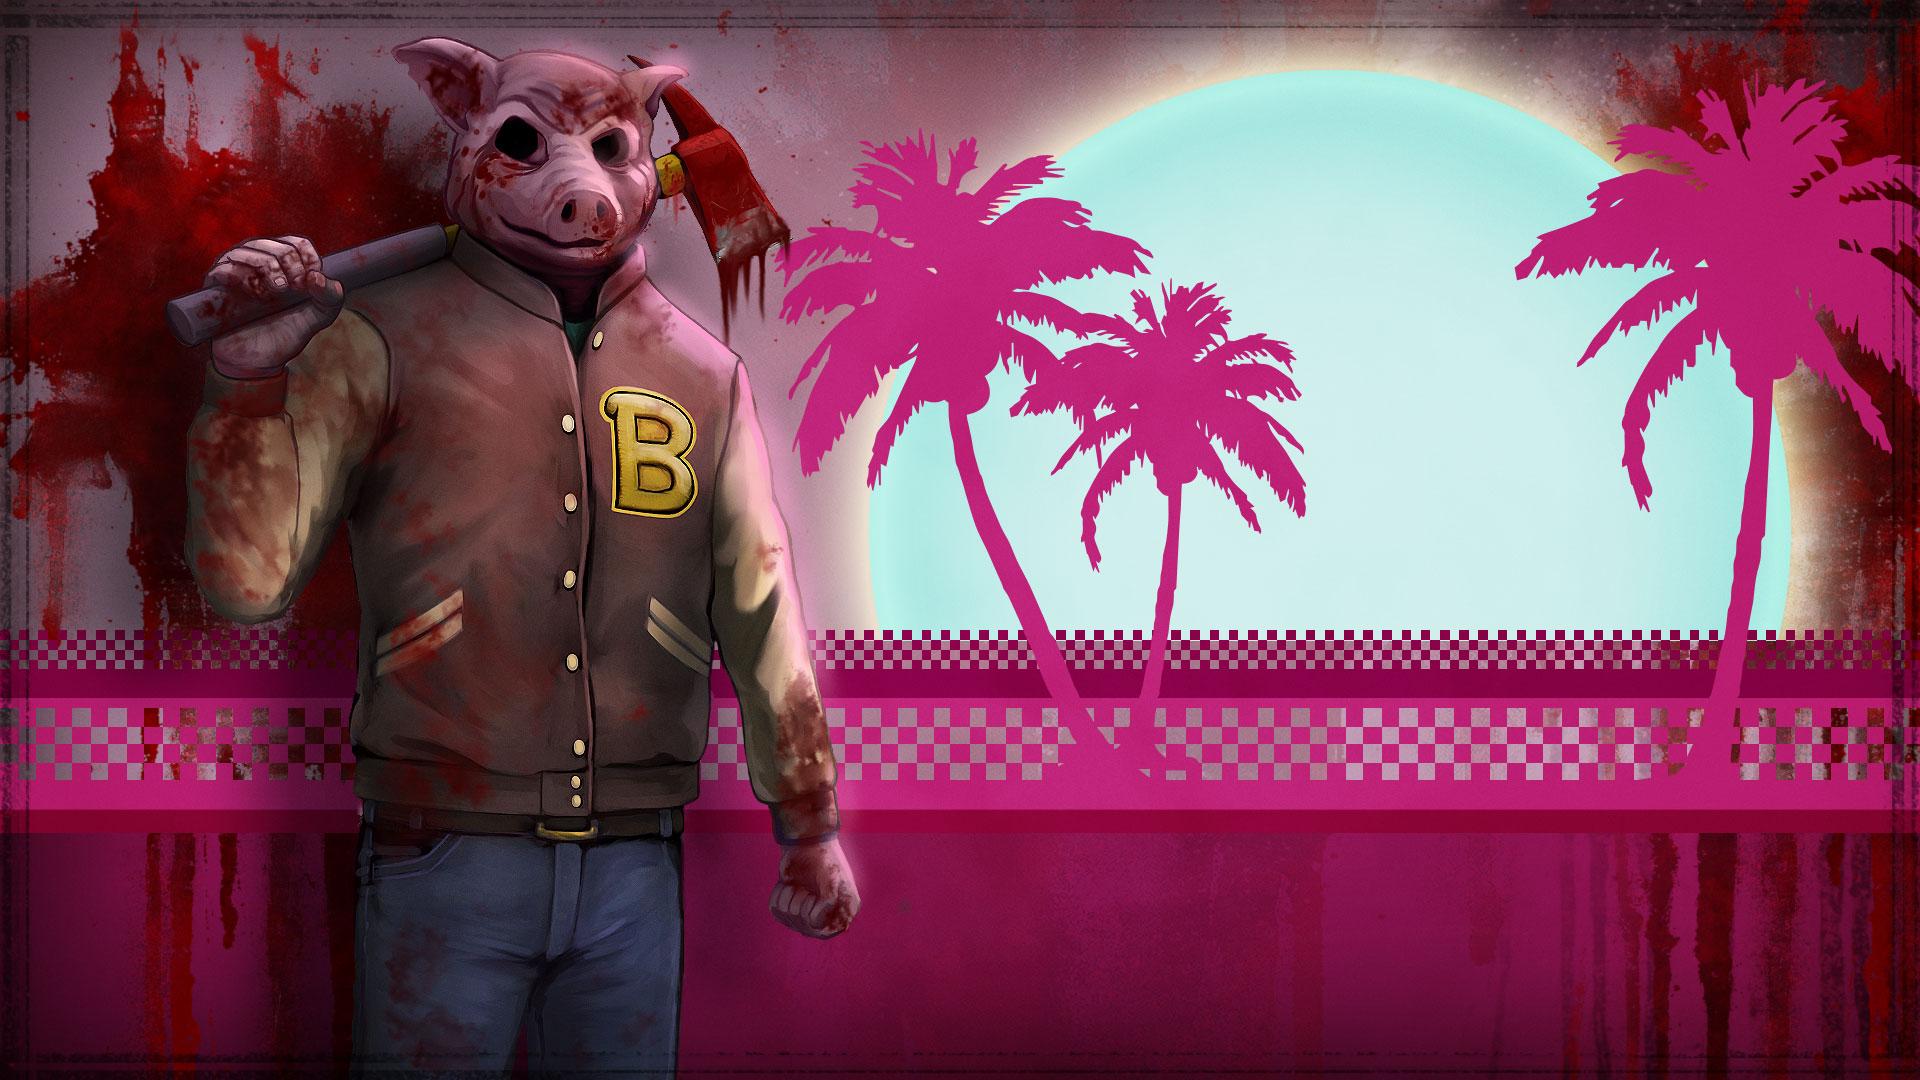 HD wallpaper, Axes, Mask, Video Game Characters, Blood, Video Games, Hotline Miami